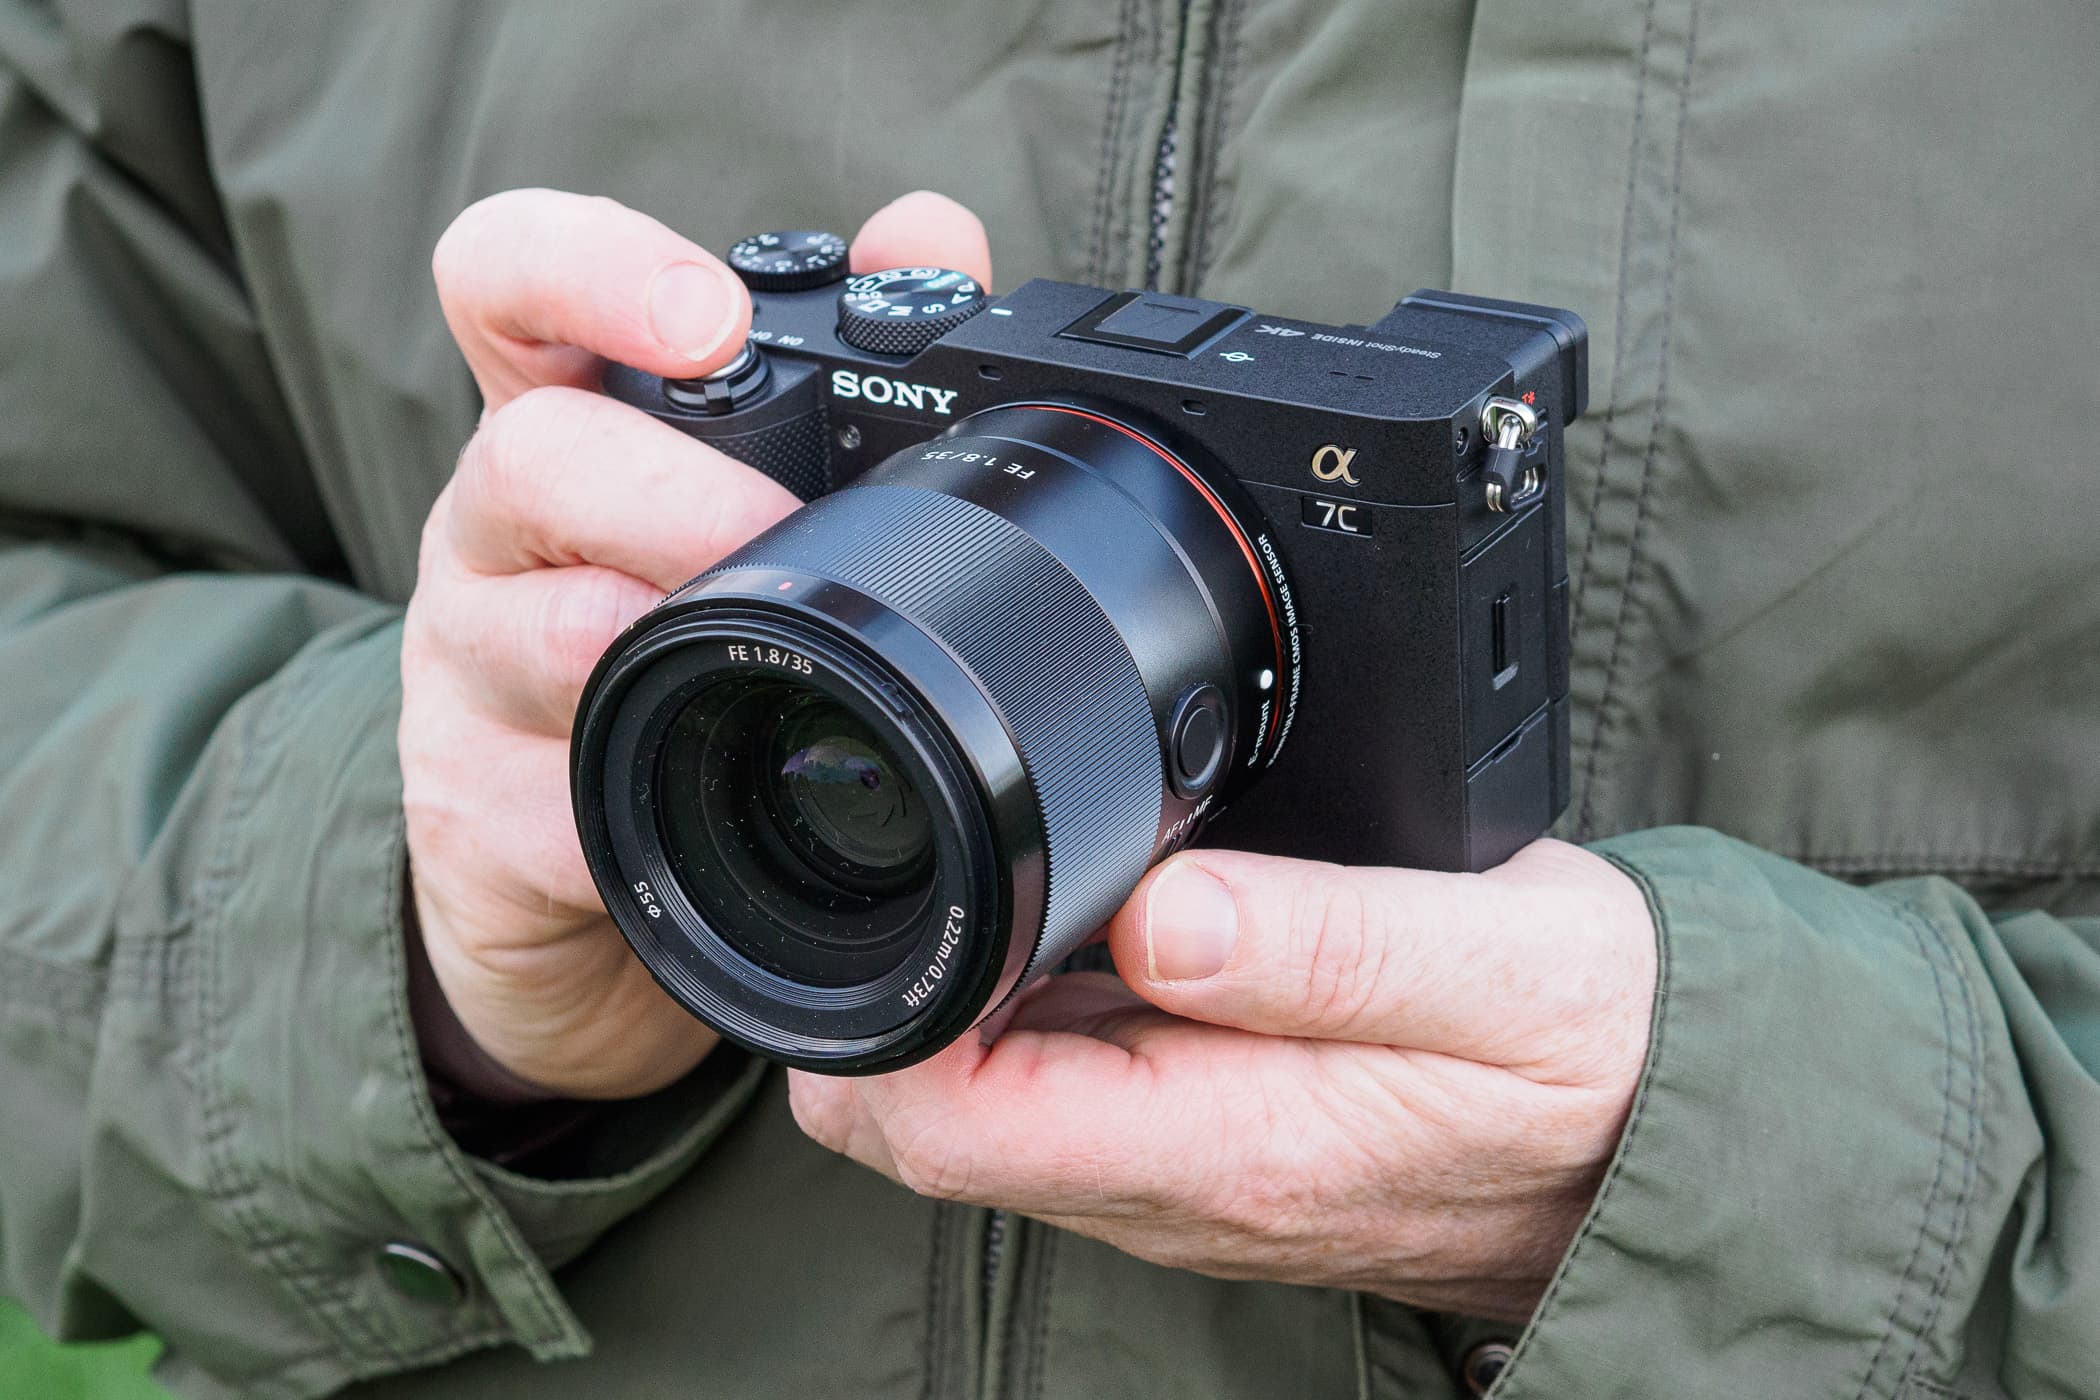 Sony a7C Announced - The Most Compact Full-Frame Mirrorless Camera